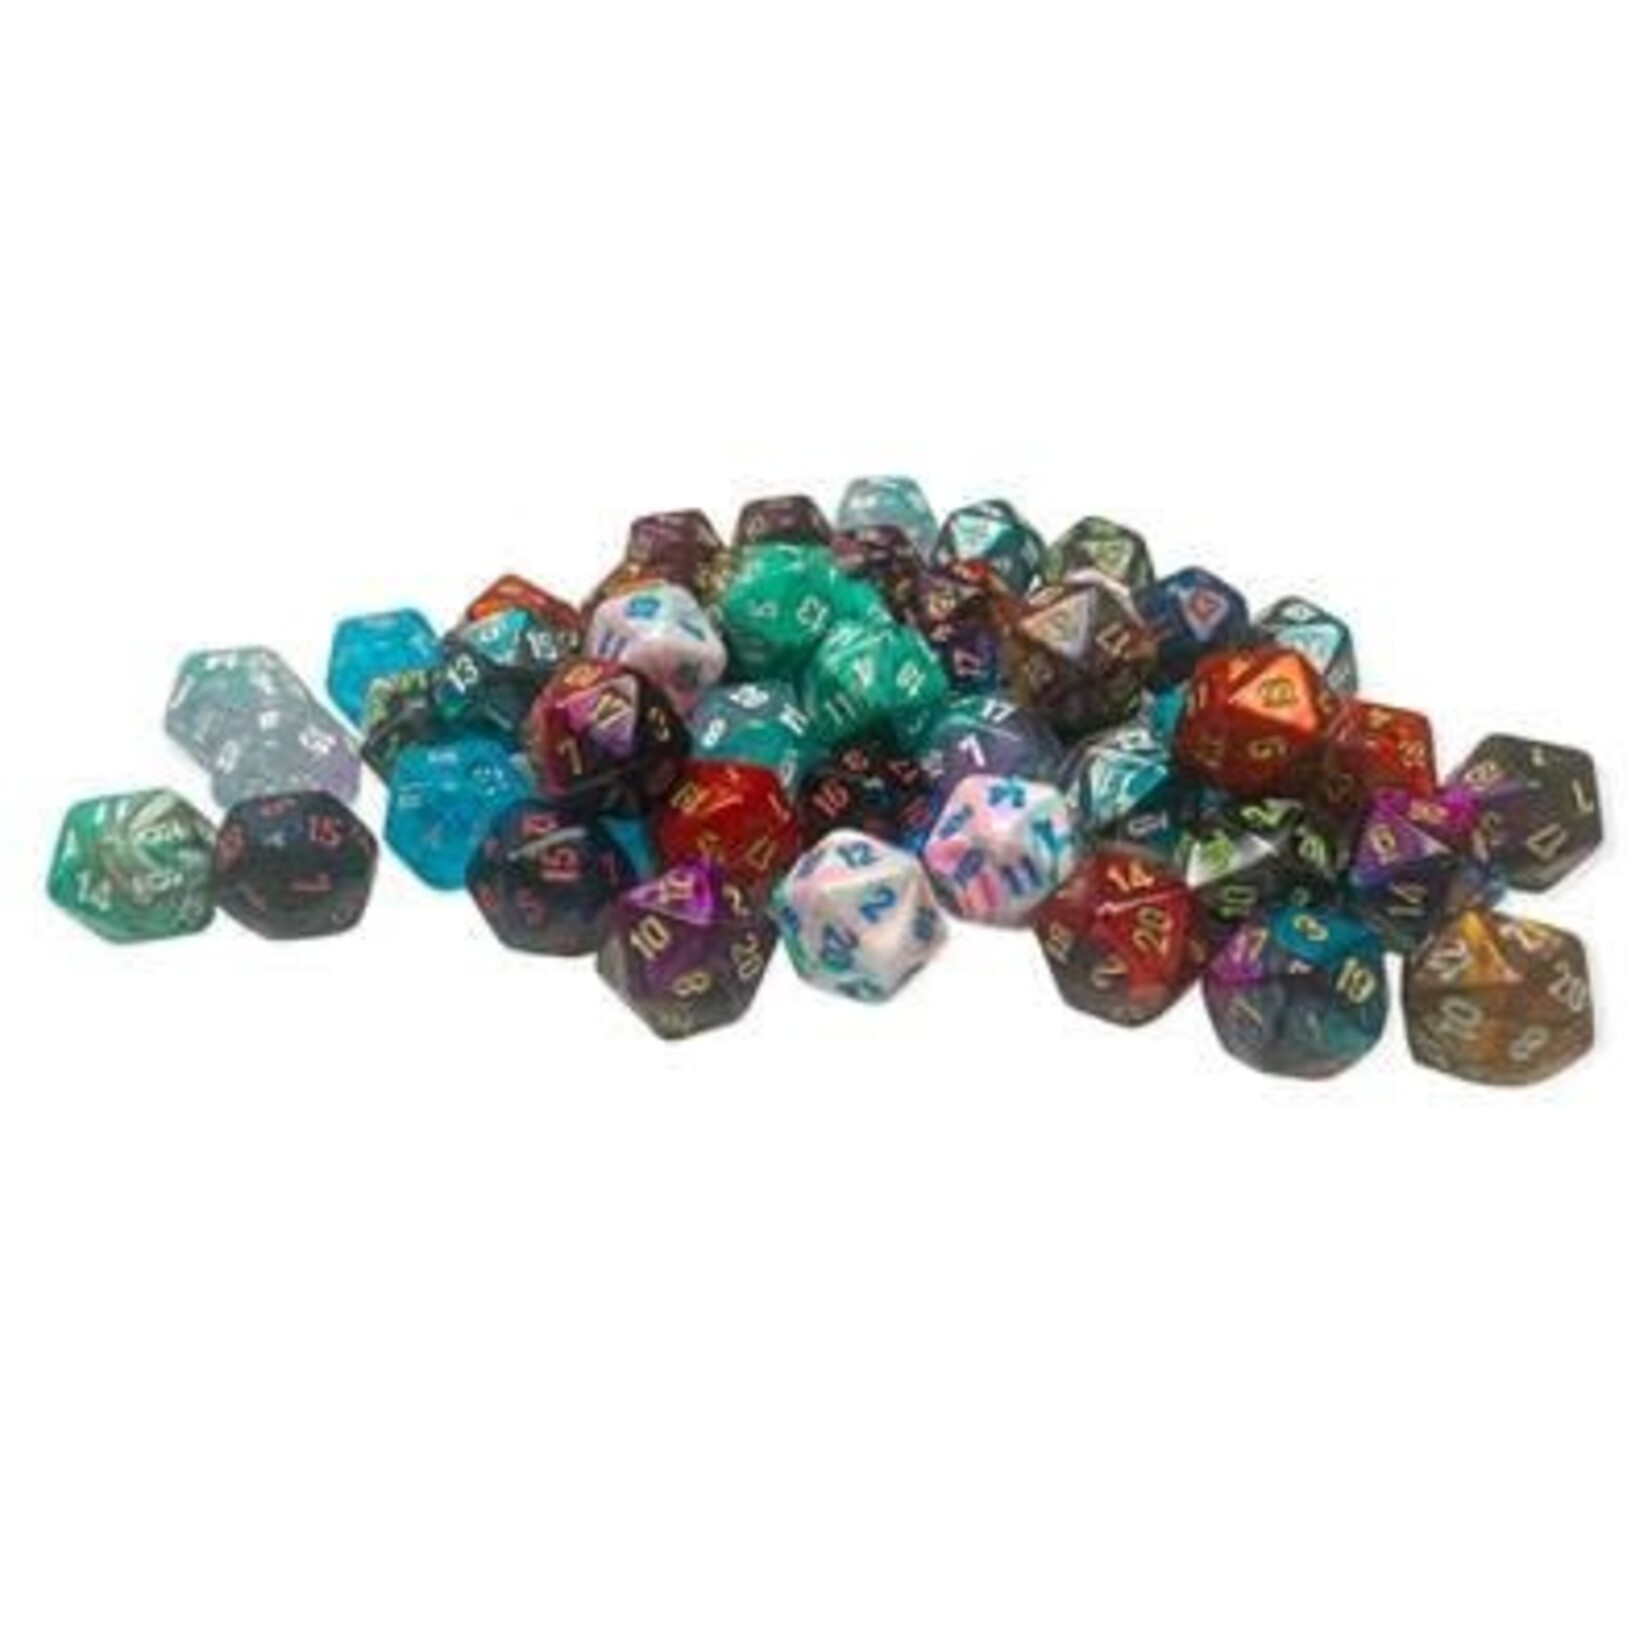 Chessex Bag of 50™ Assorted Loose Mini-hedral™ d20s - 2nd Release